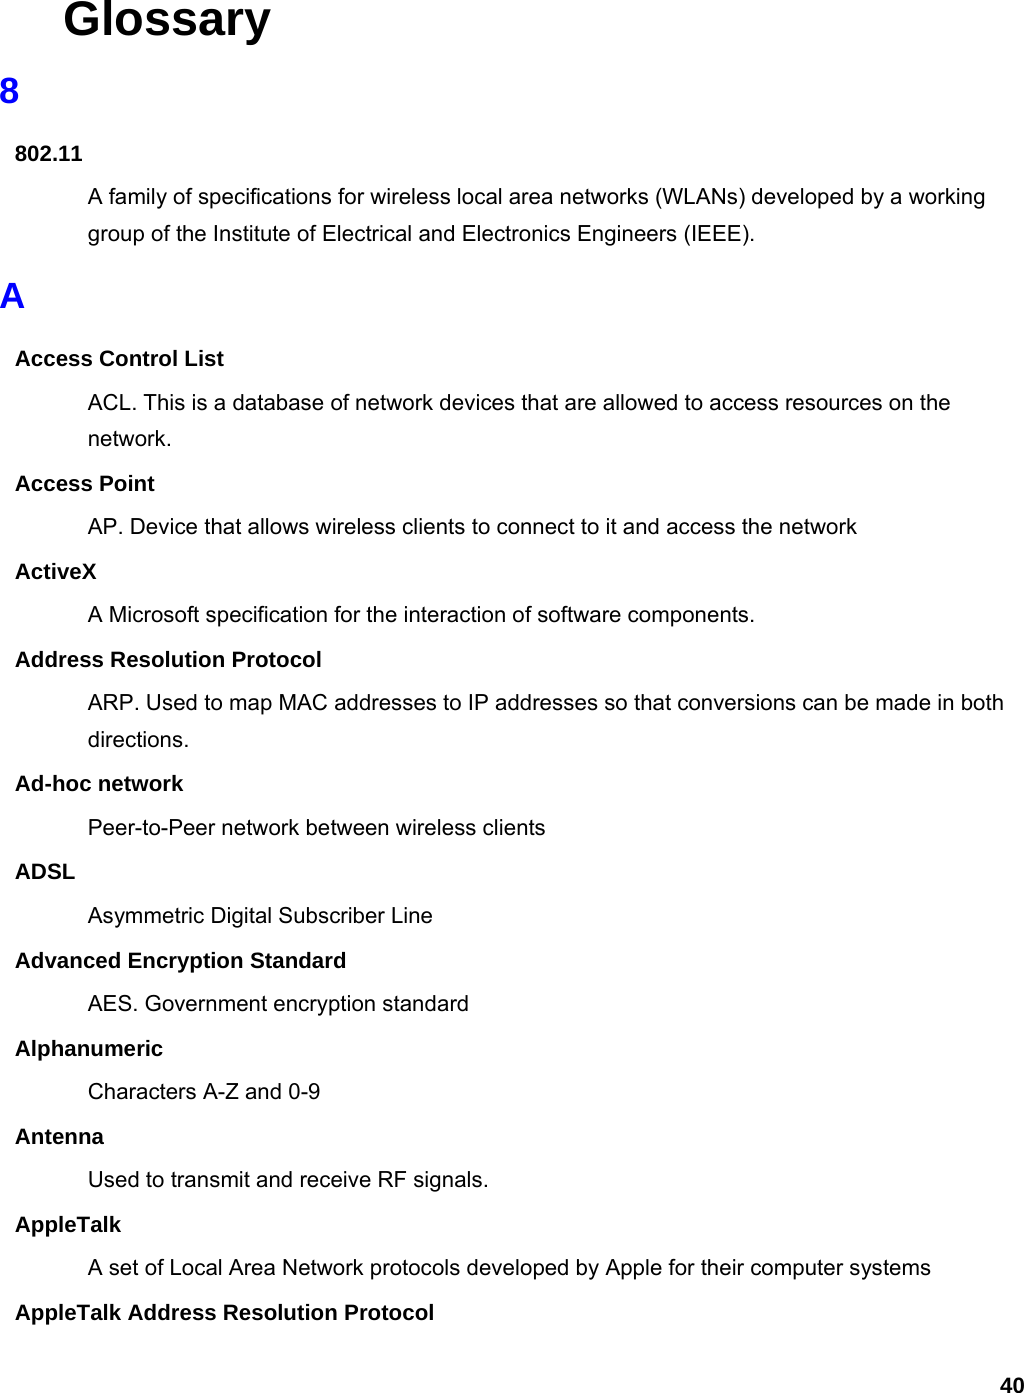 40 Glossary 8 802.11 A family of specifications for wireless local area networks (WLANs) developed by a working group of the Institute of Electrical and Electronics Engineers (IEEE).   A Access Control List ACL. This is a database of network devices that are allowed to access resources on the network. Access Point AP. Device that allows wireless clients to connect to it and access the network ActiveX A Microsoft specification for the interaction of software components.   Address Resolution Protocol ARP. Used to map MAC addresses to IP addresses so that conversions can be made in both directions. Ad-hoc network Peer-to-Peer network between wireless clients ADSL Asymmetric Digital Subscriber Line Advanced Encryption Standard AES. Government encryption standard Alphanumeric Characters A-Z and 0-9 Antenna Used to transmit and receive RF signals. AppleTalk A set of Local Area Network protocols developed by Apple for their computer systems AppleTalk Address Resolution Protocol 